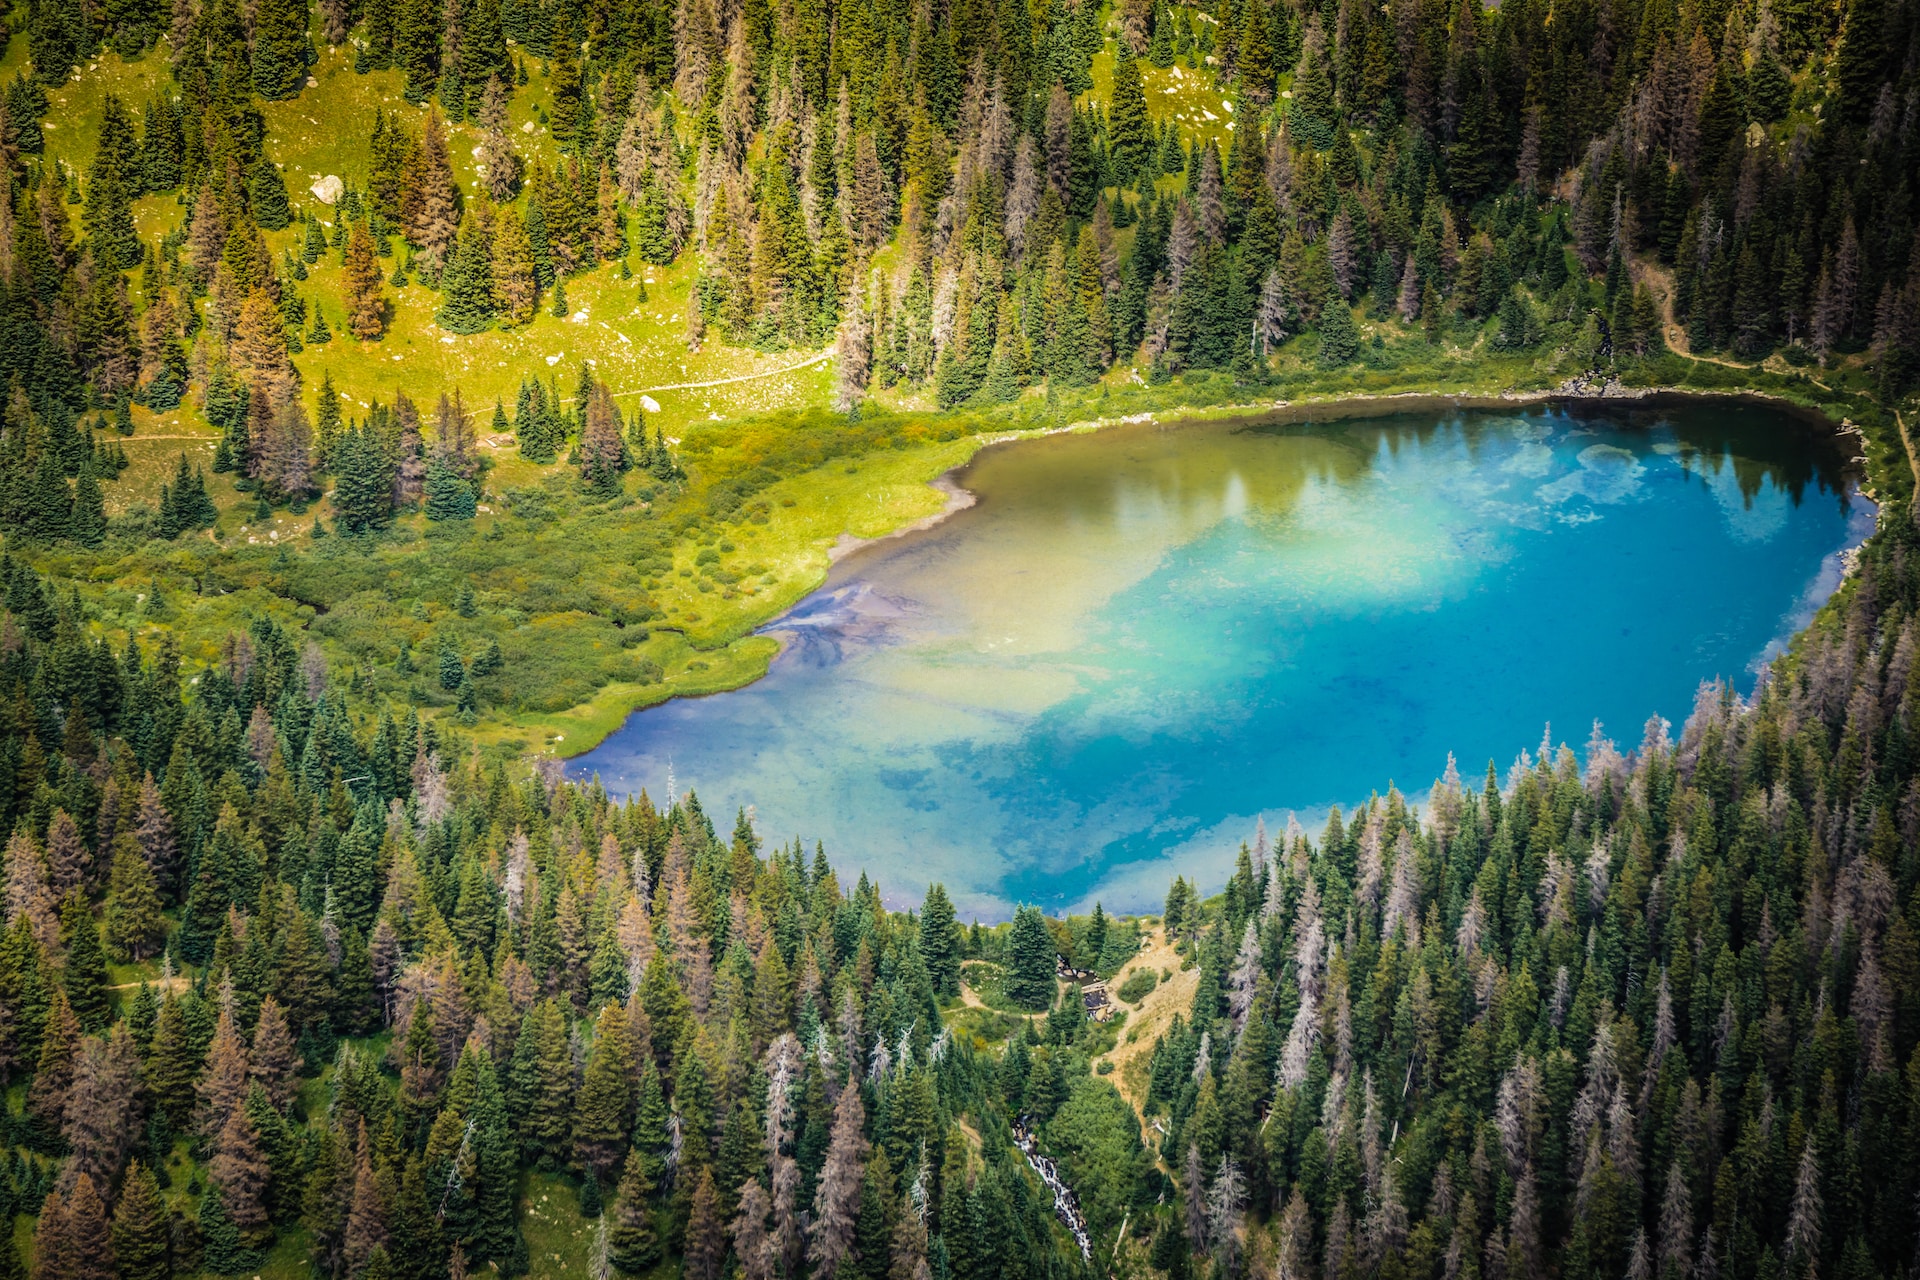 A view of the alpine lake in Colorado.